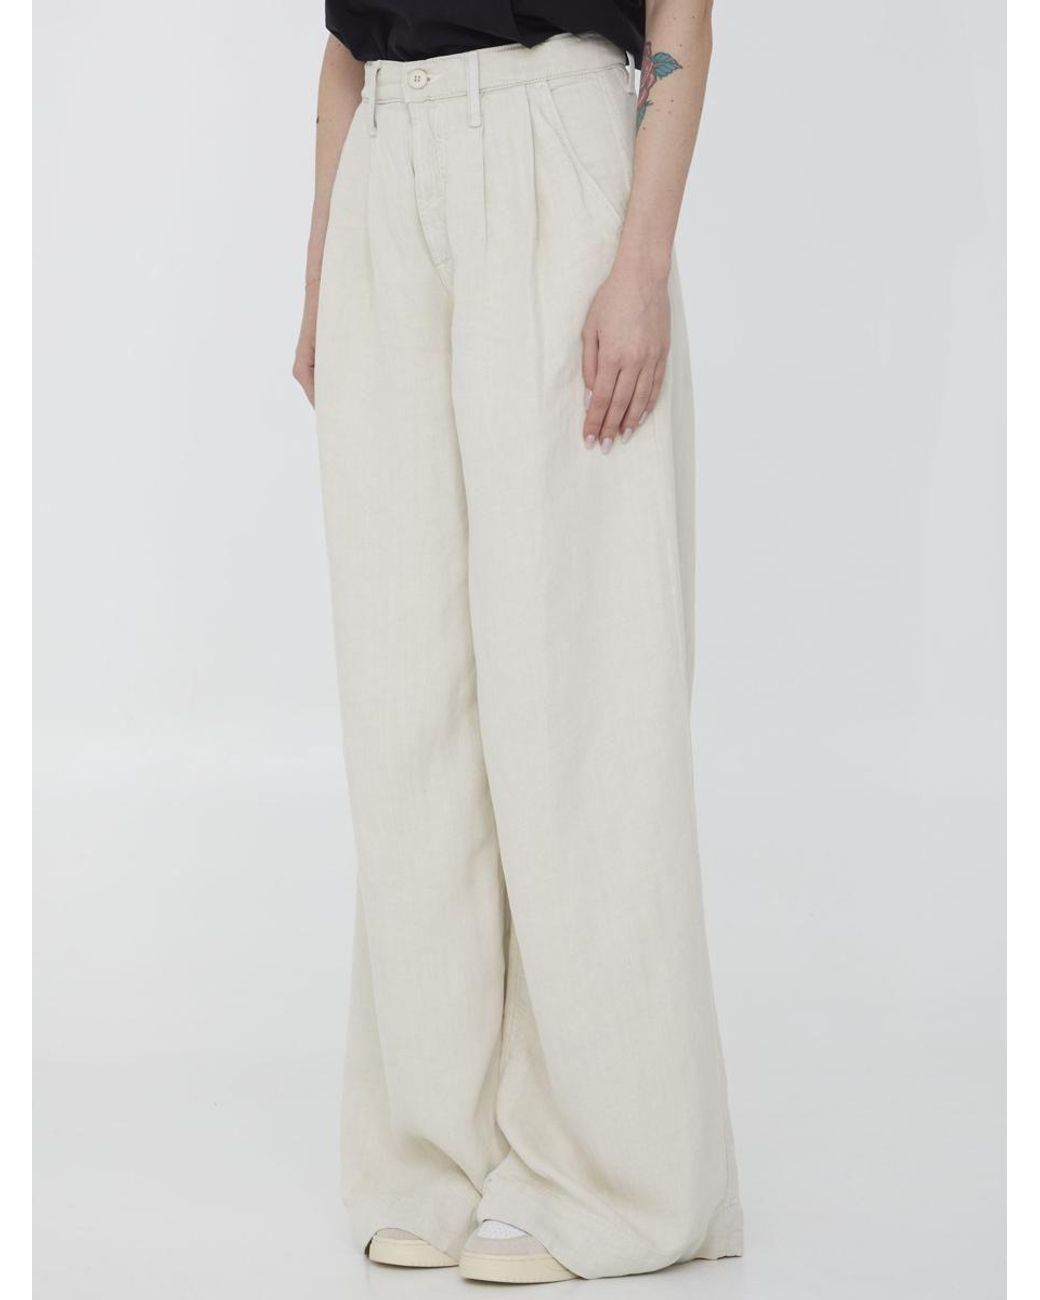 Mother Pouty Prep Heel Pants in White | Lyst